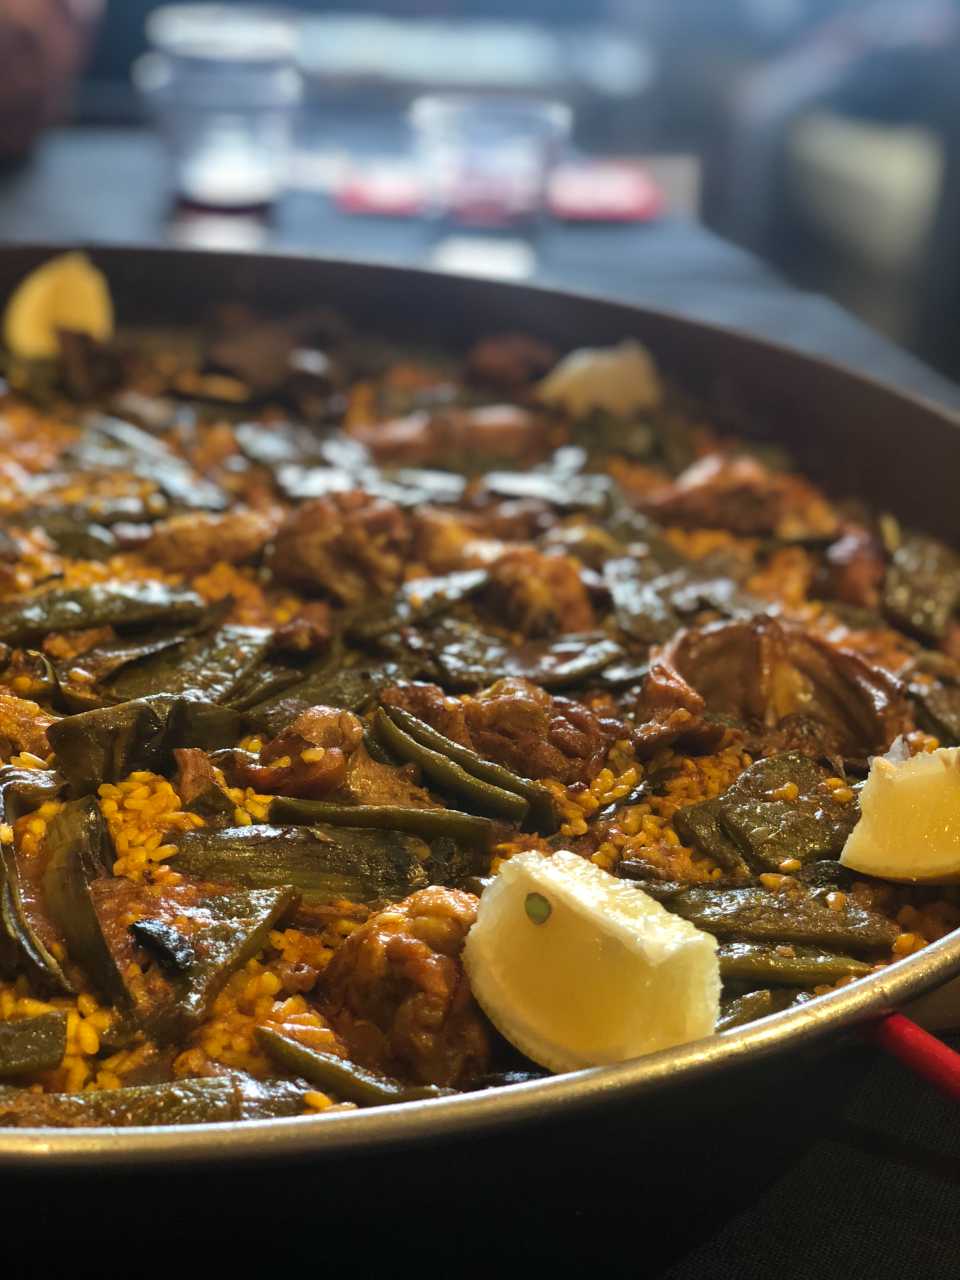 Llearn to Make an Authentic Paella